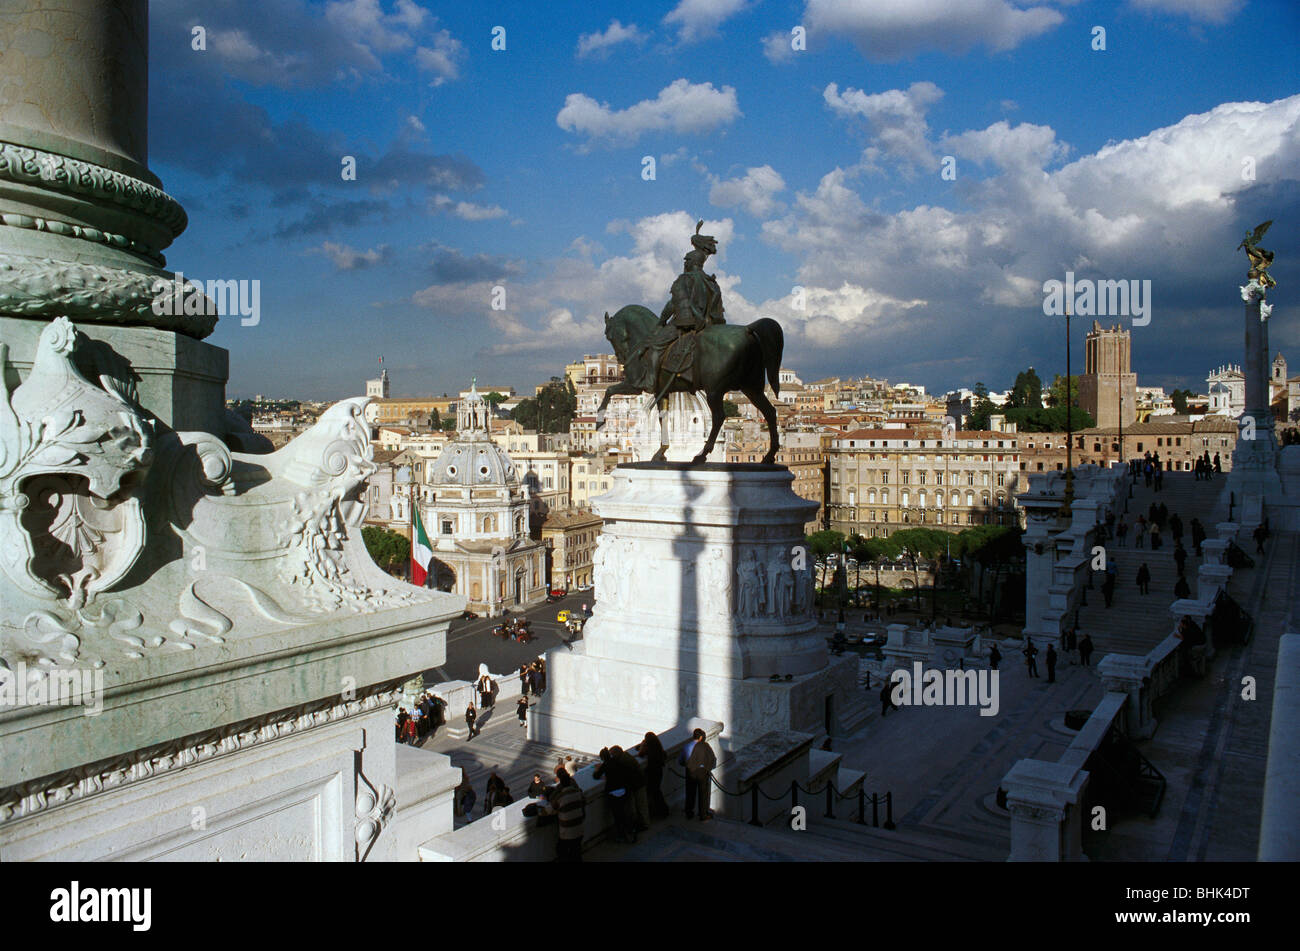 Rome. Italy. Il Vittoriano. King Victor Emmanuel is depicted on a bronze equestrian statue overlooking the city. Stock Photo